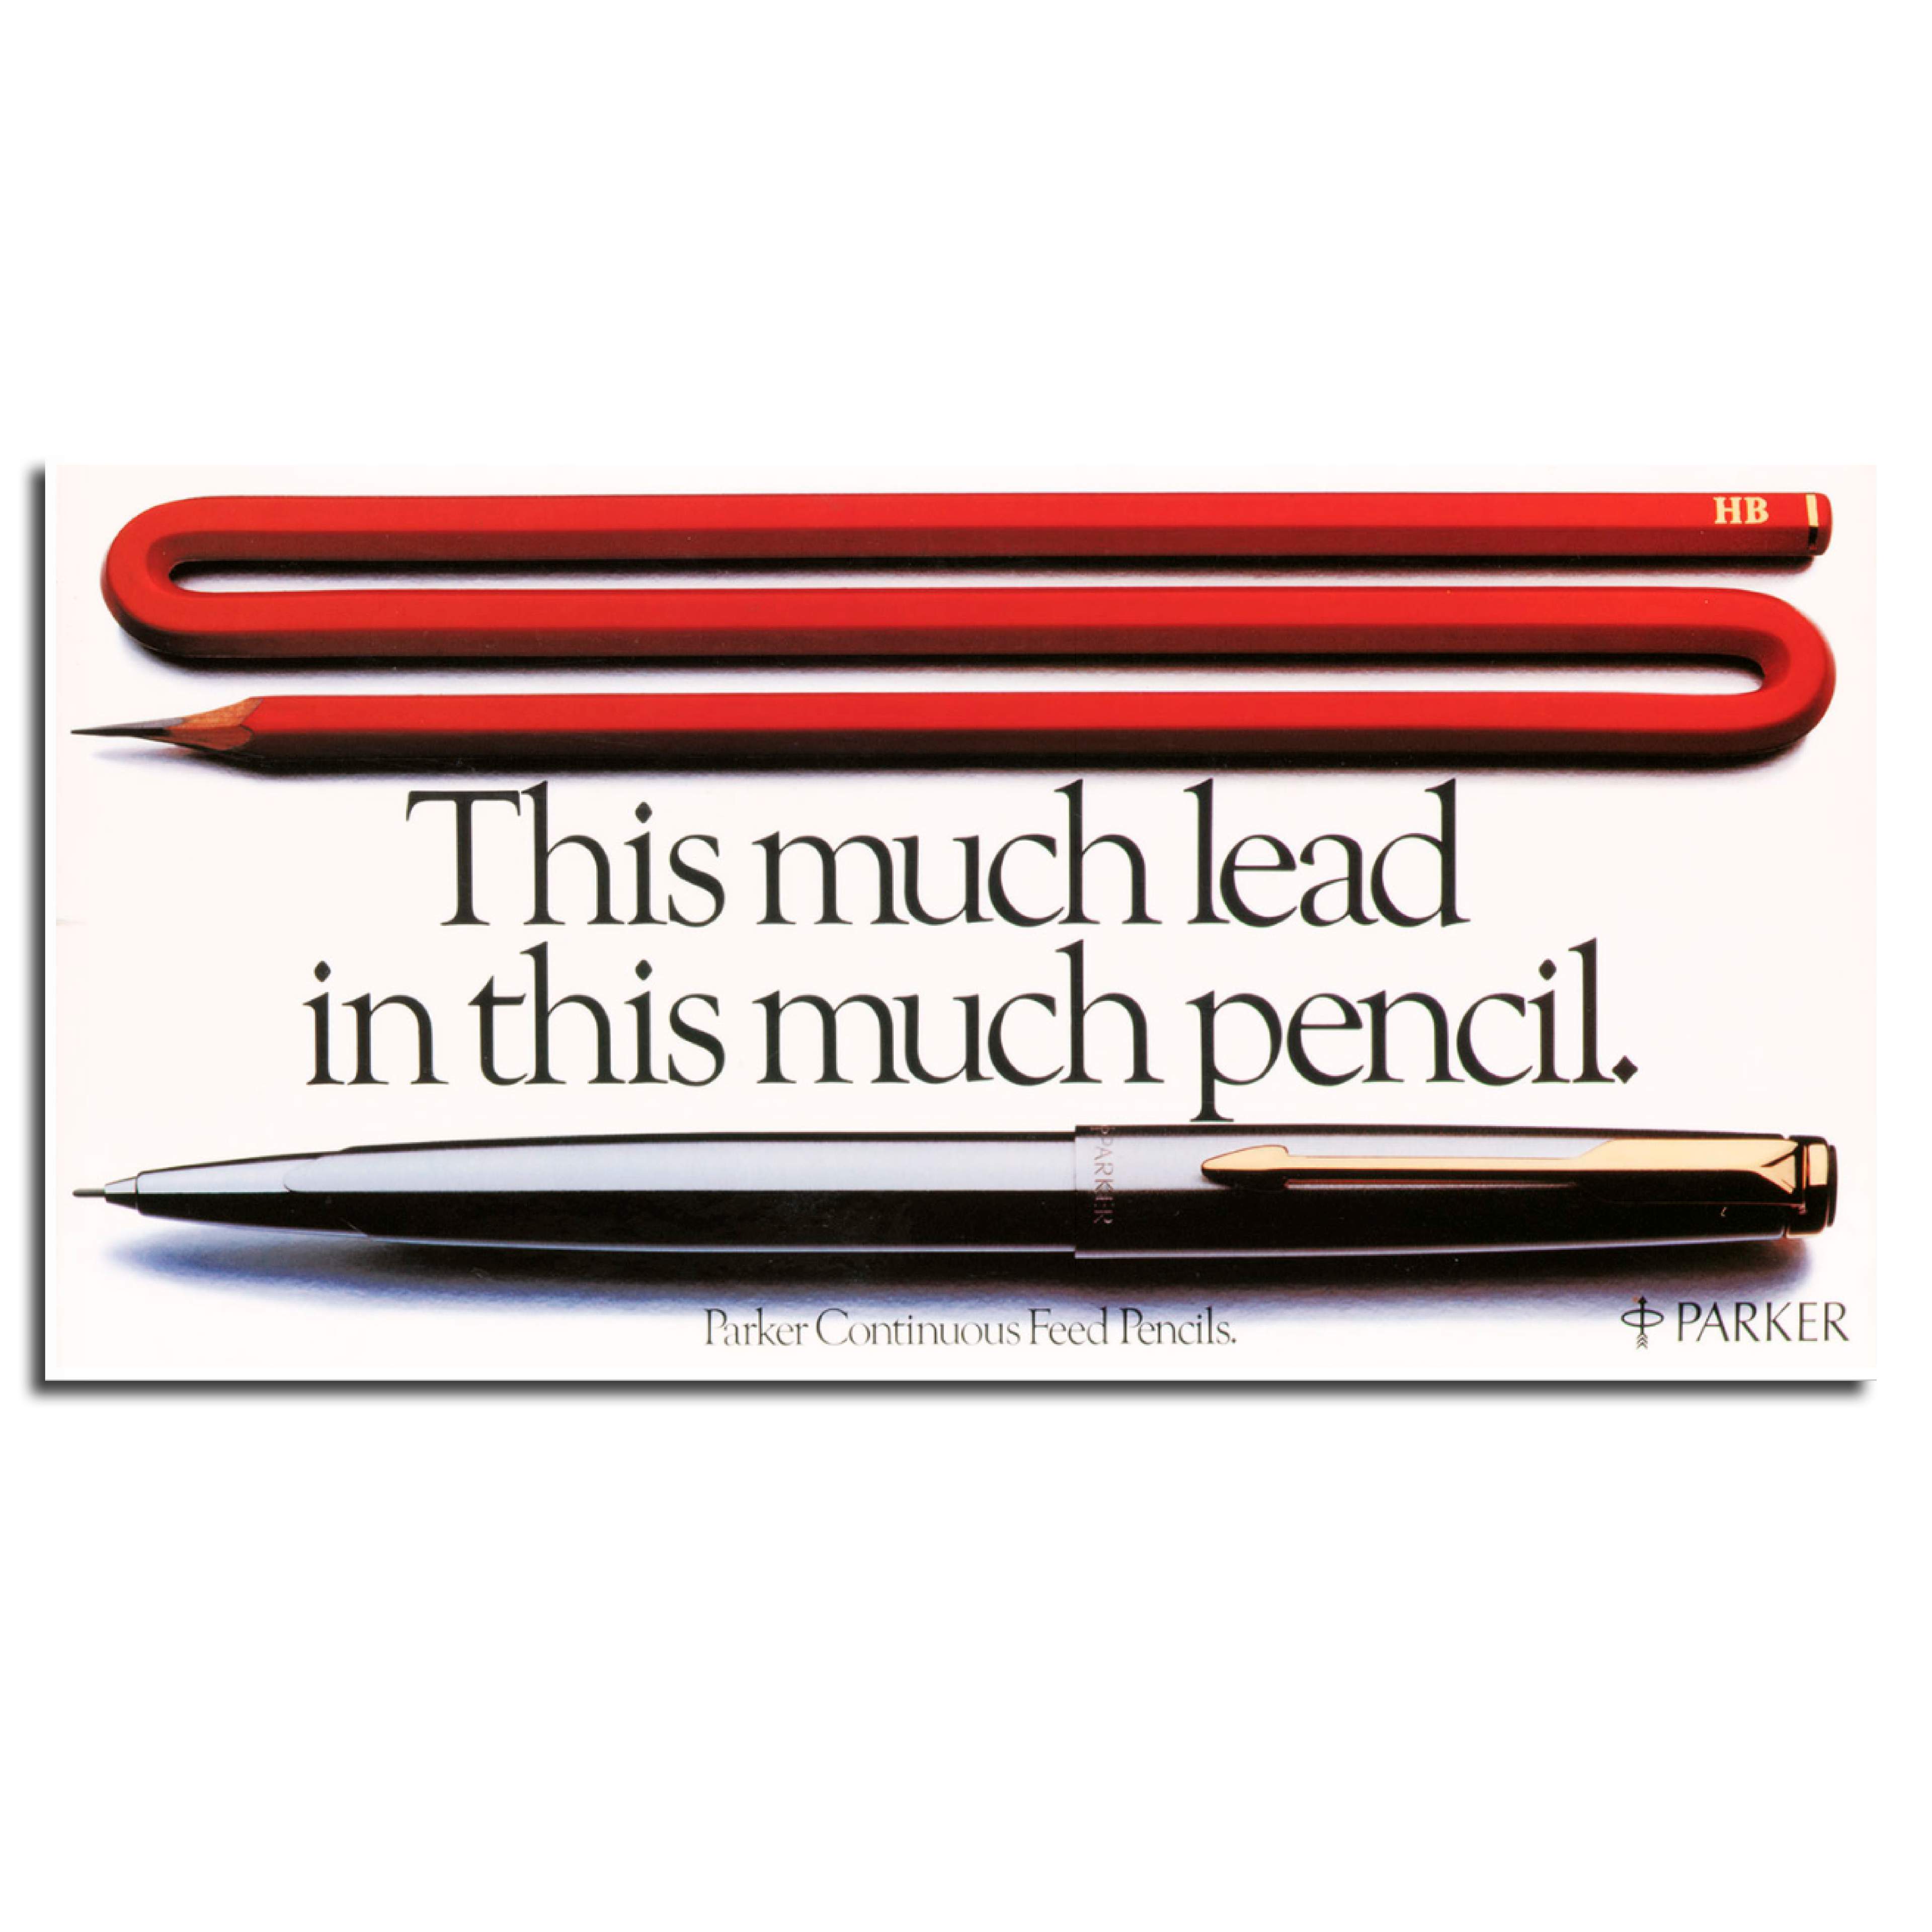 Long red pencil folded up with a Parker Pen pencil underneath. Parker Pencil award-winning poster.